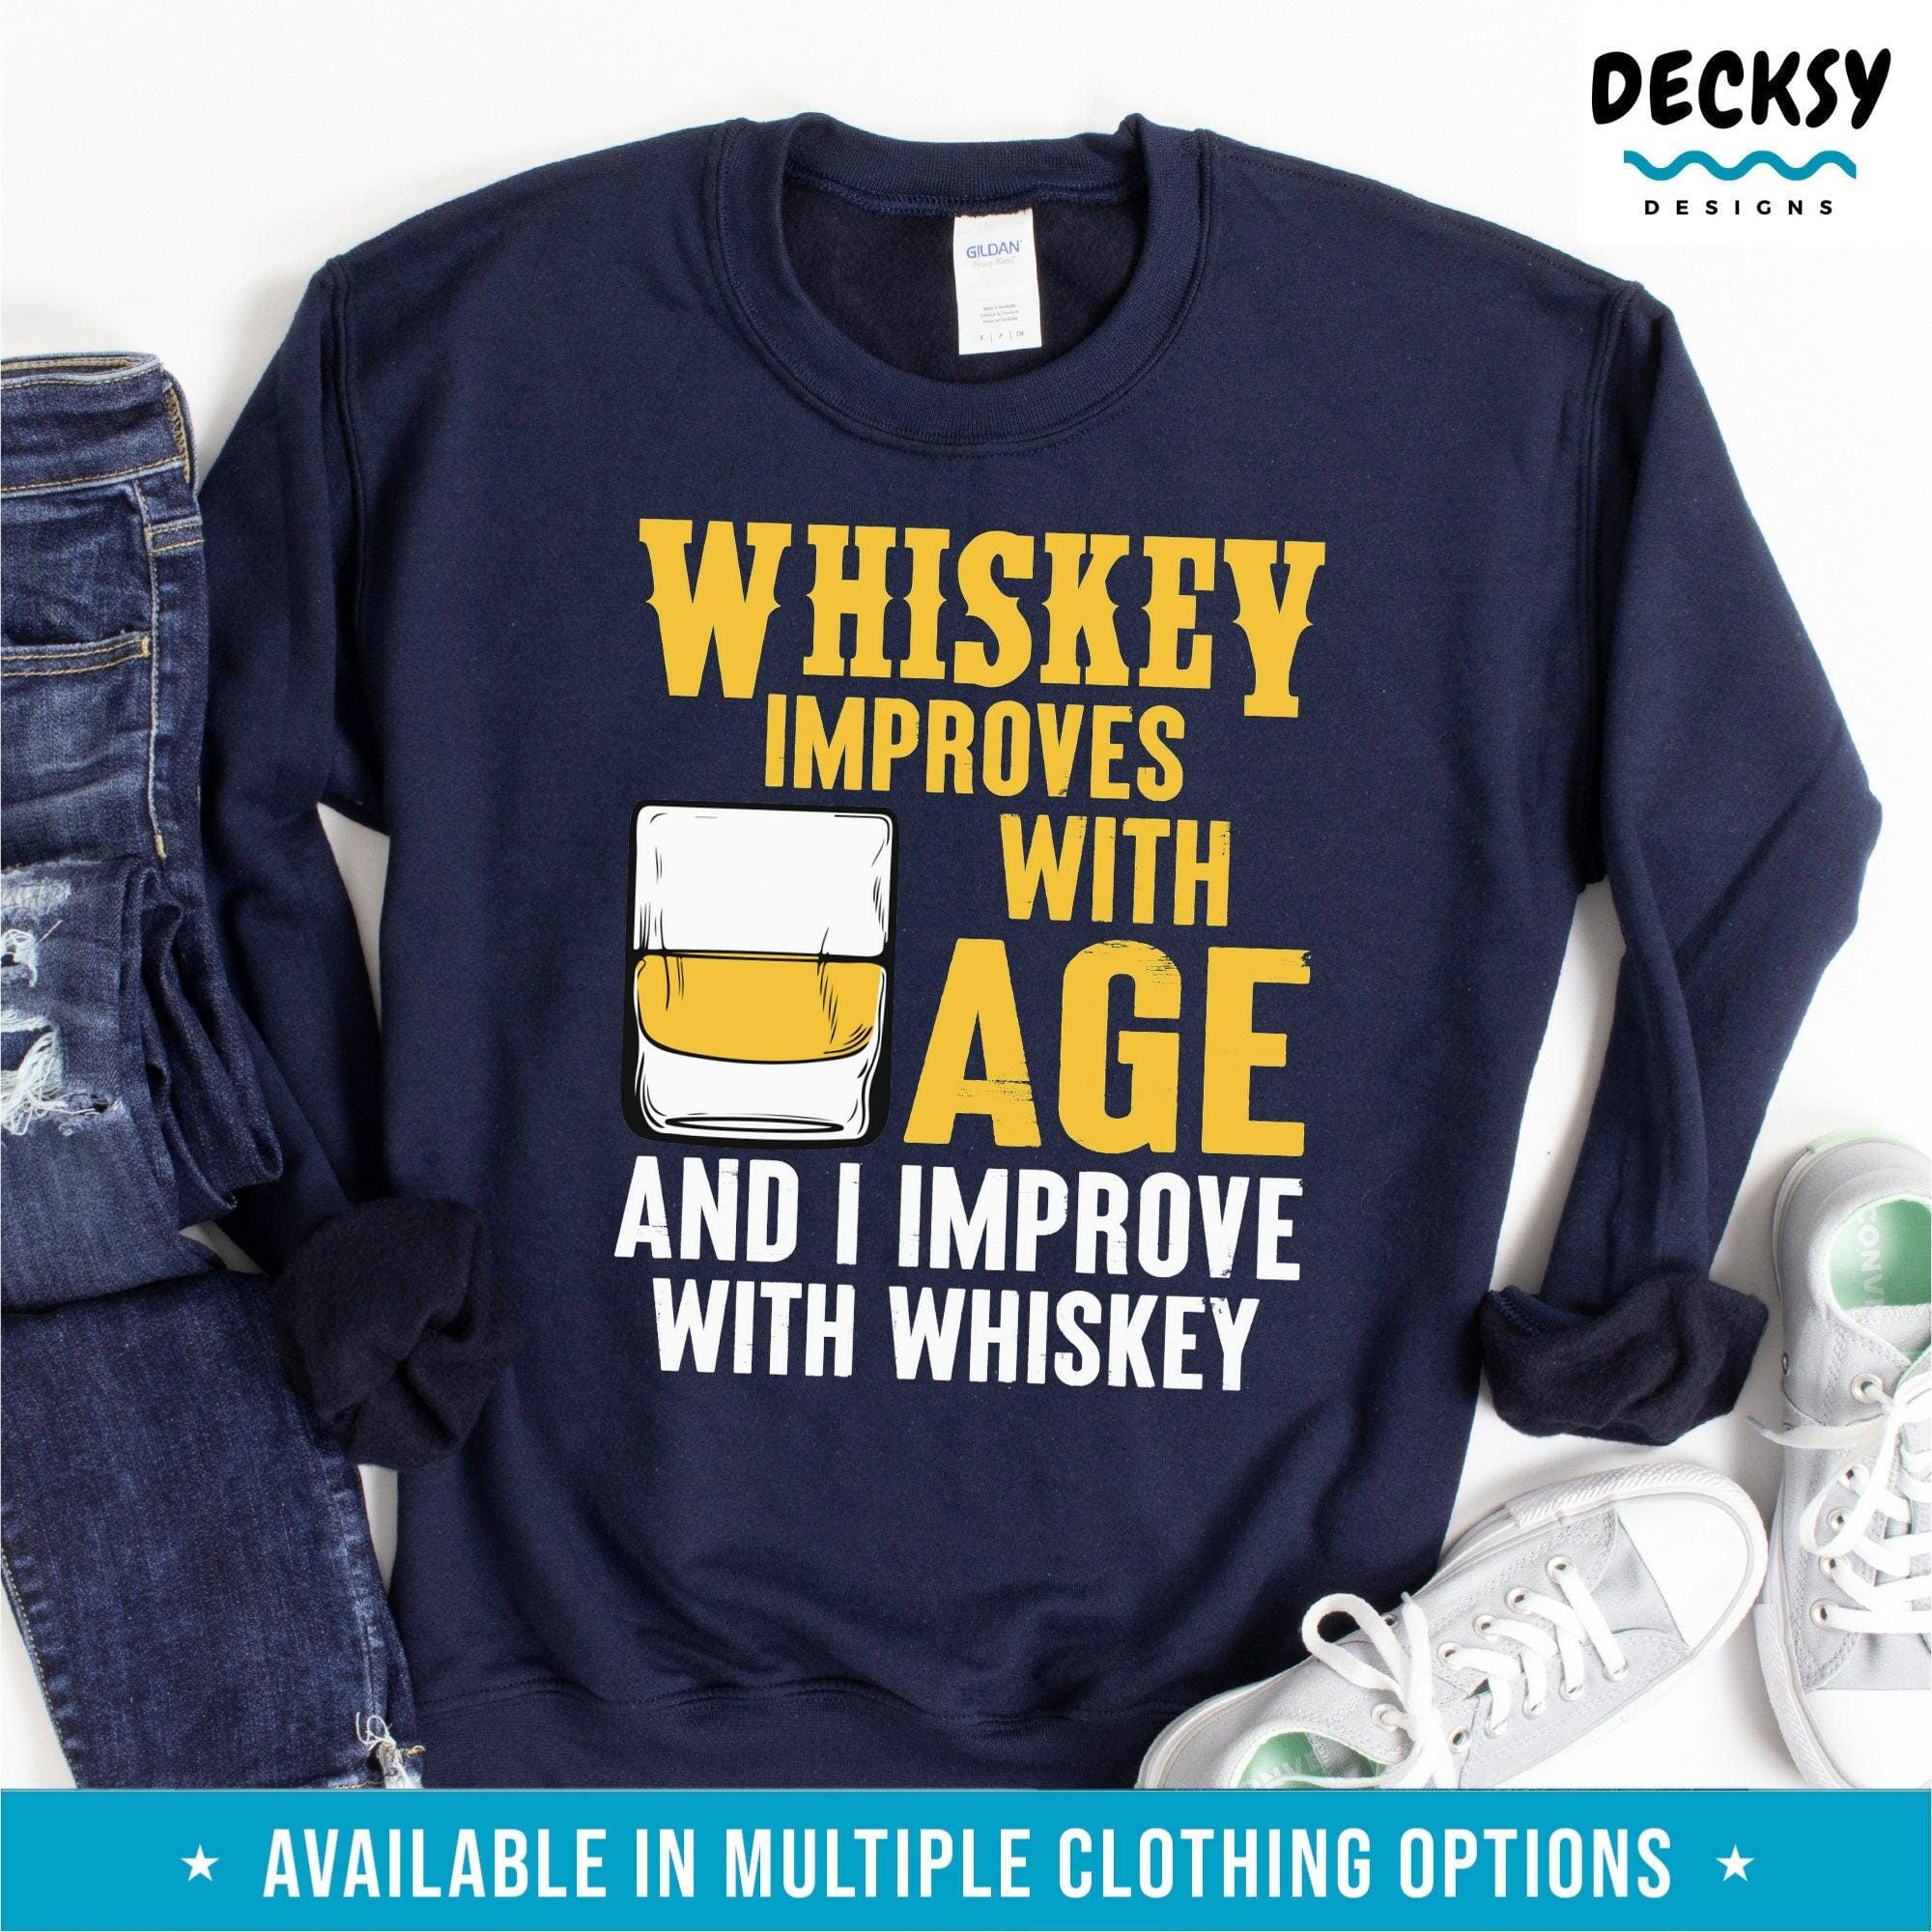 Drinking Tee Shirt, Whiskey Lover Gift-Clothing:Gender-Neutral Adult Clothing:Tops & Tees:T-shirts:Graphic Tees-DecksyDesigns